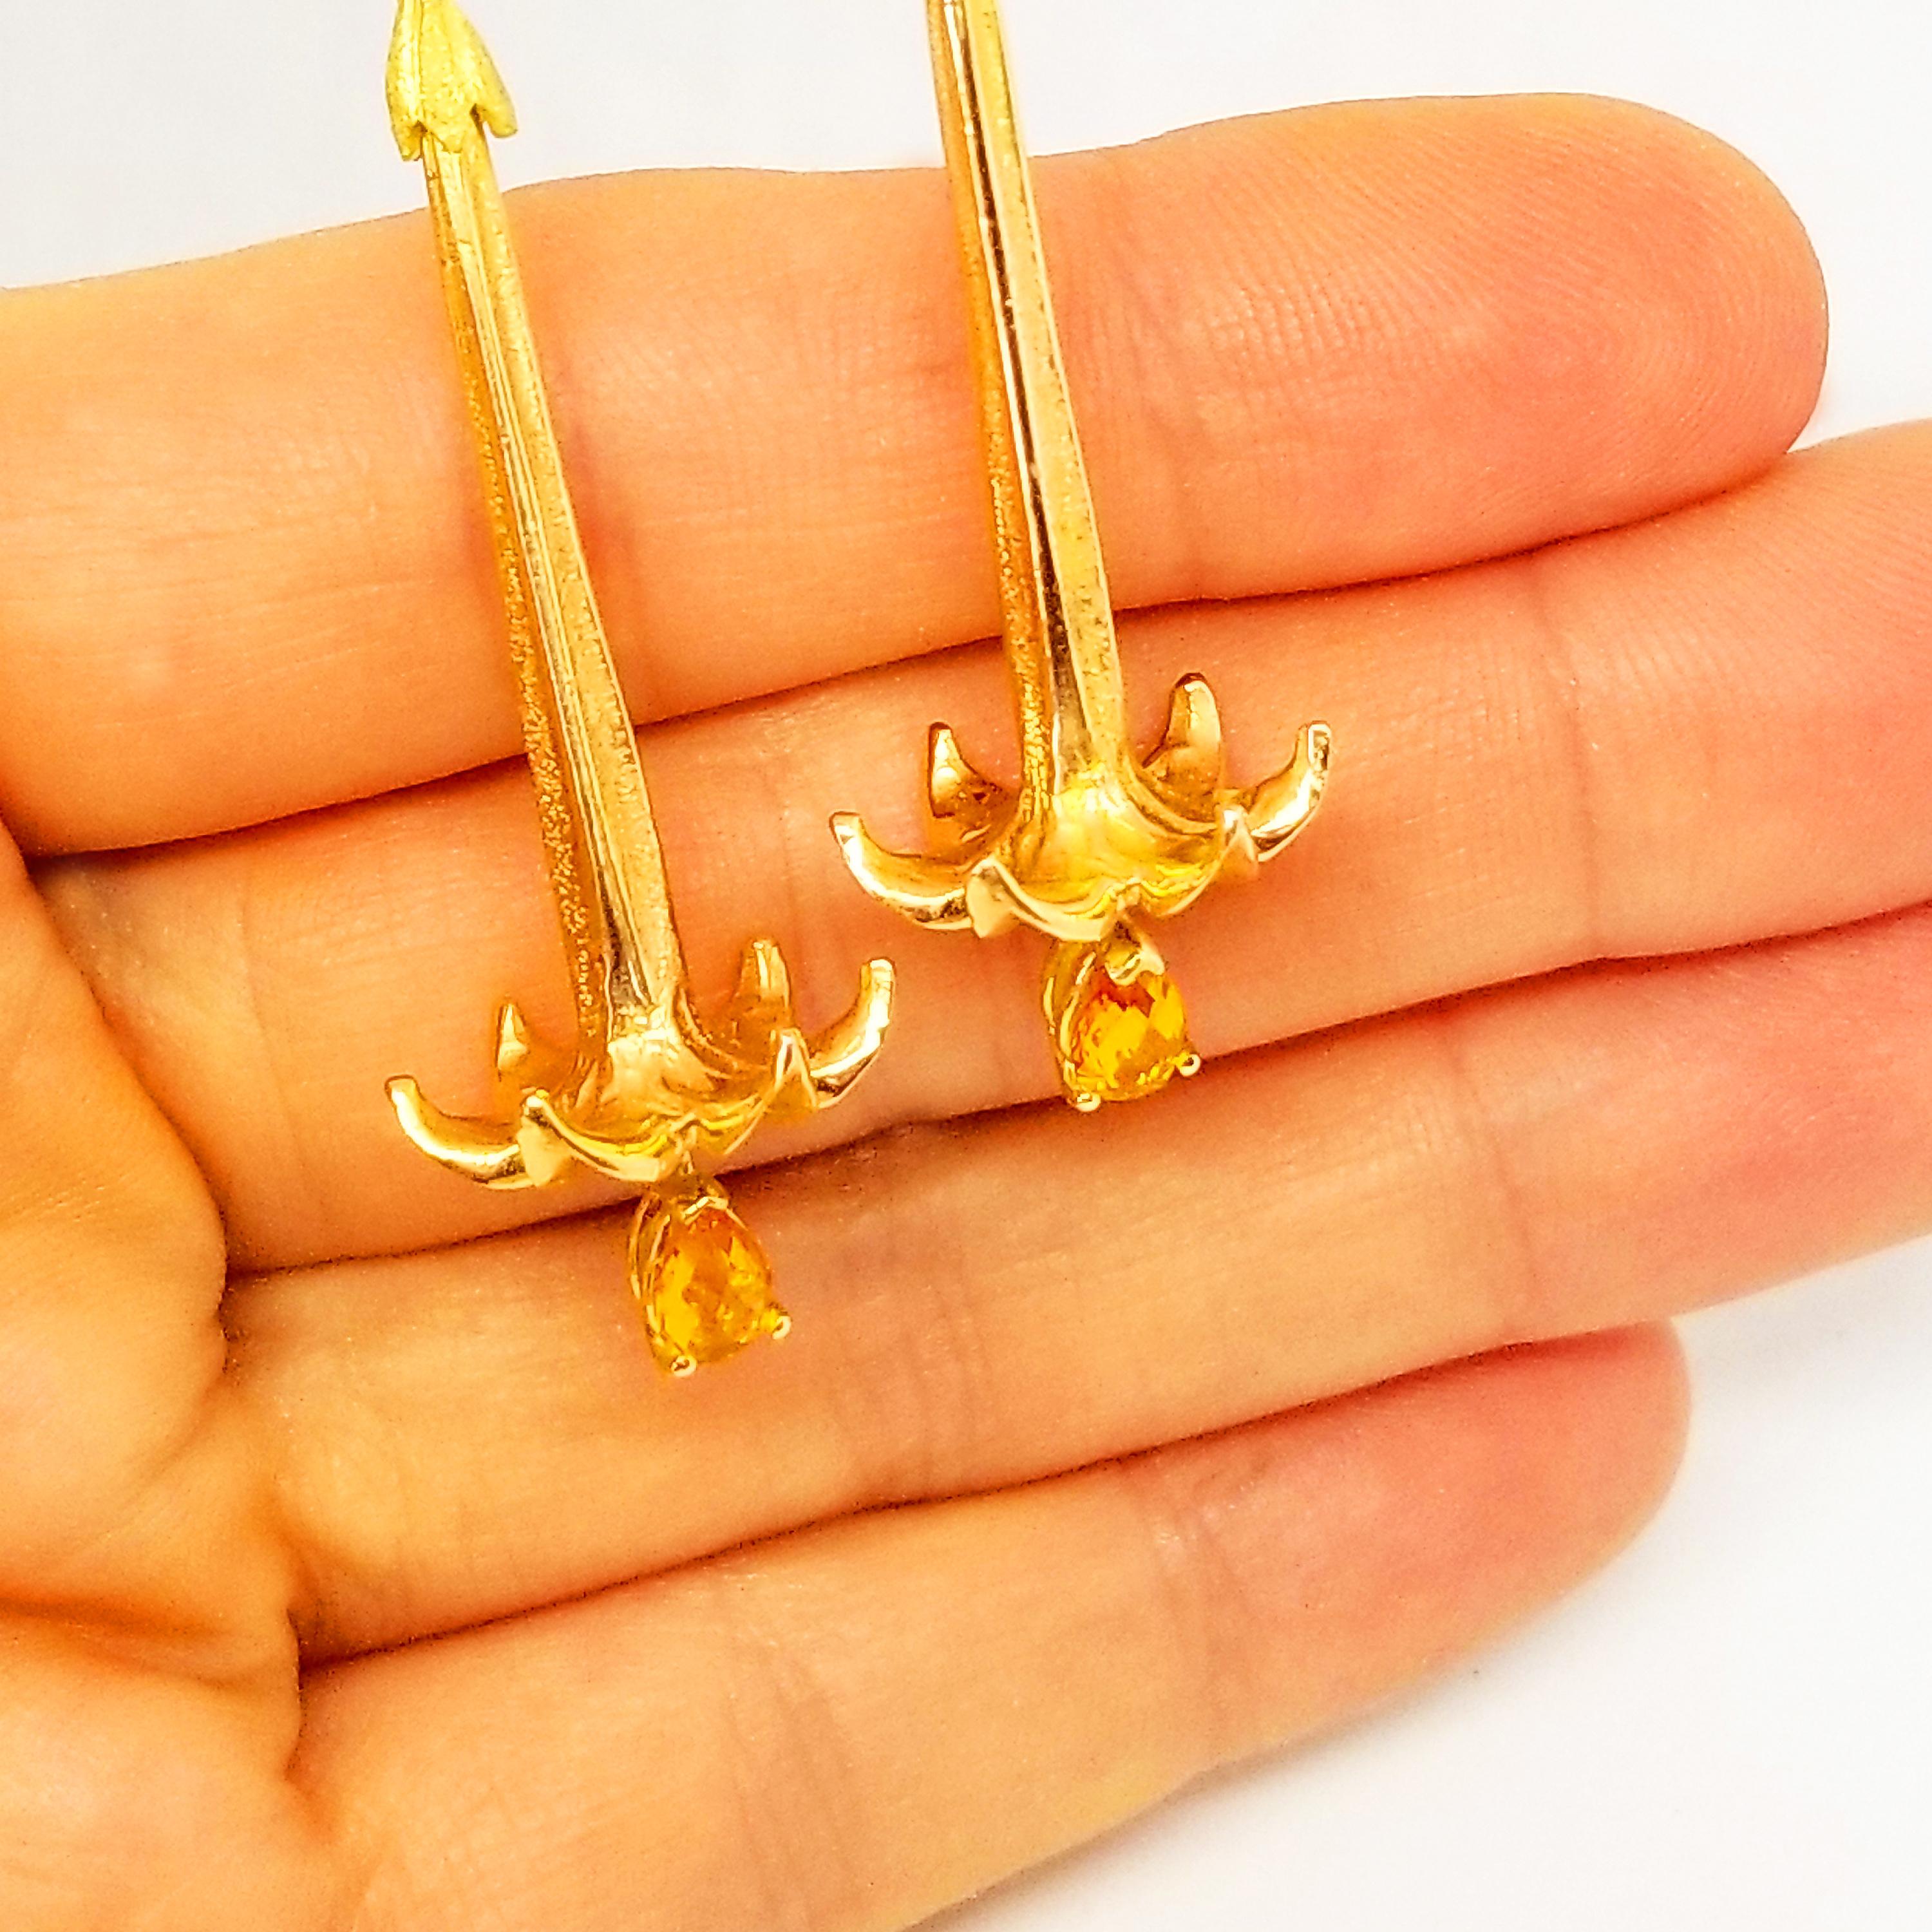 These Long and Elegant Earrings are One of a Kind in 18K Yellow and Rose Gold featuring faceted, Pear Shape Briolette Sapphires of Deep Canary Yellow Hue and Gem Quality. Each Gemstone is prong set and hangs as a moving dangle below a long, Hand